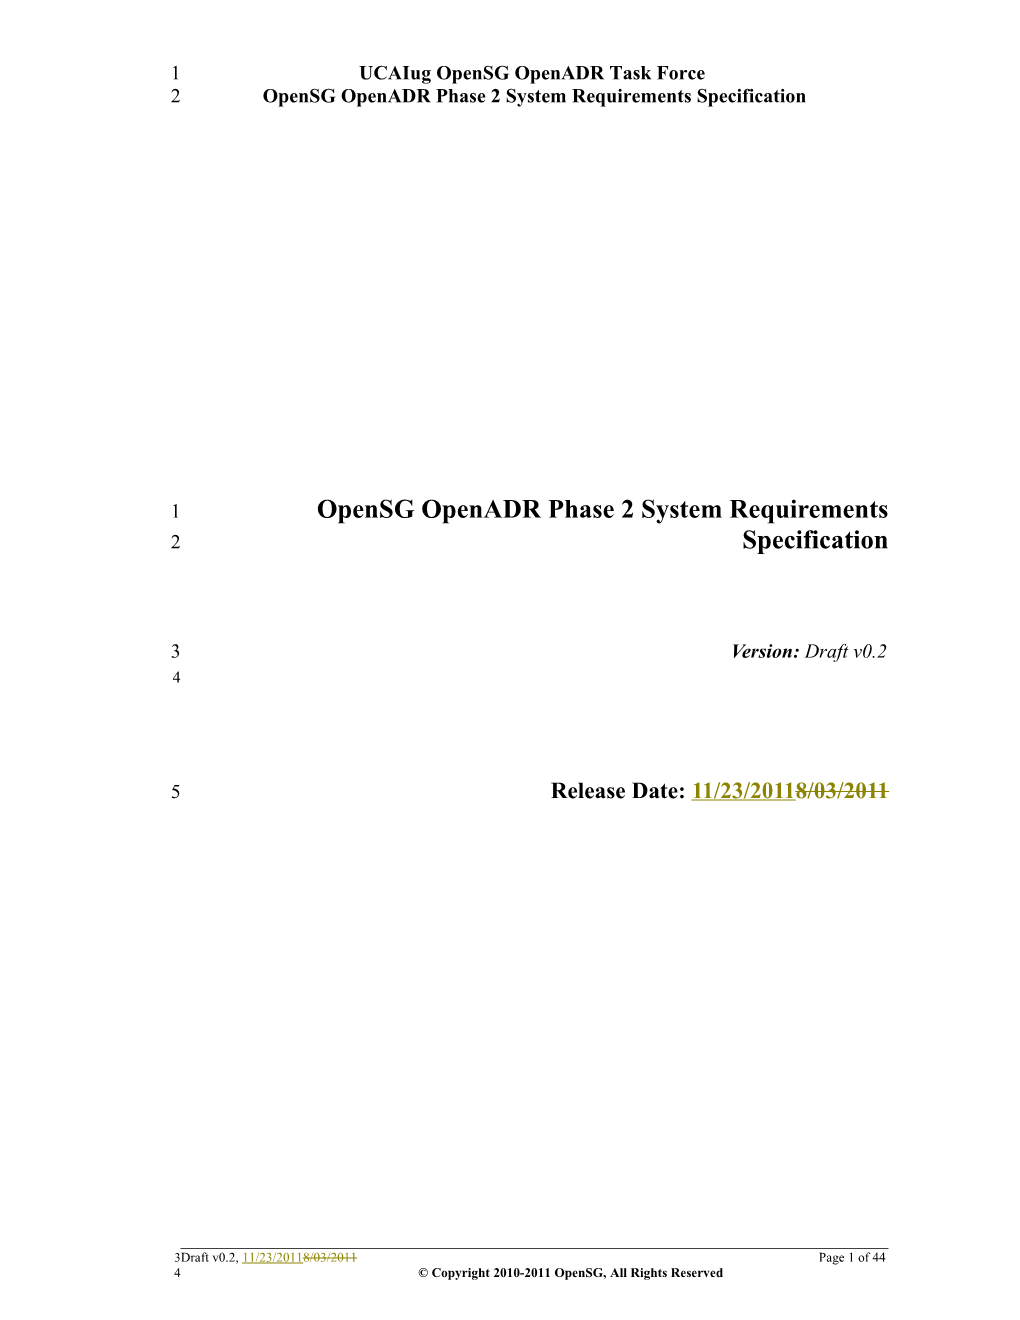 Opensg Openadr Phase 2 System Requirements Specification